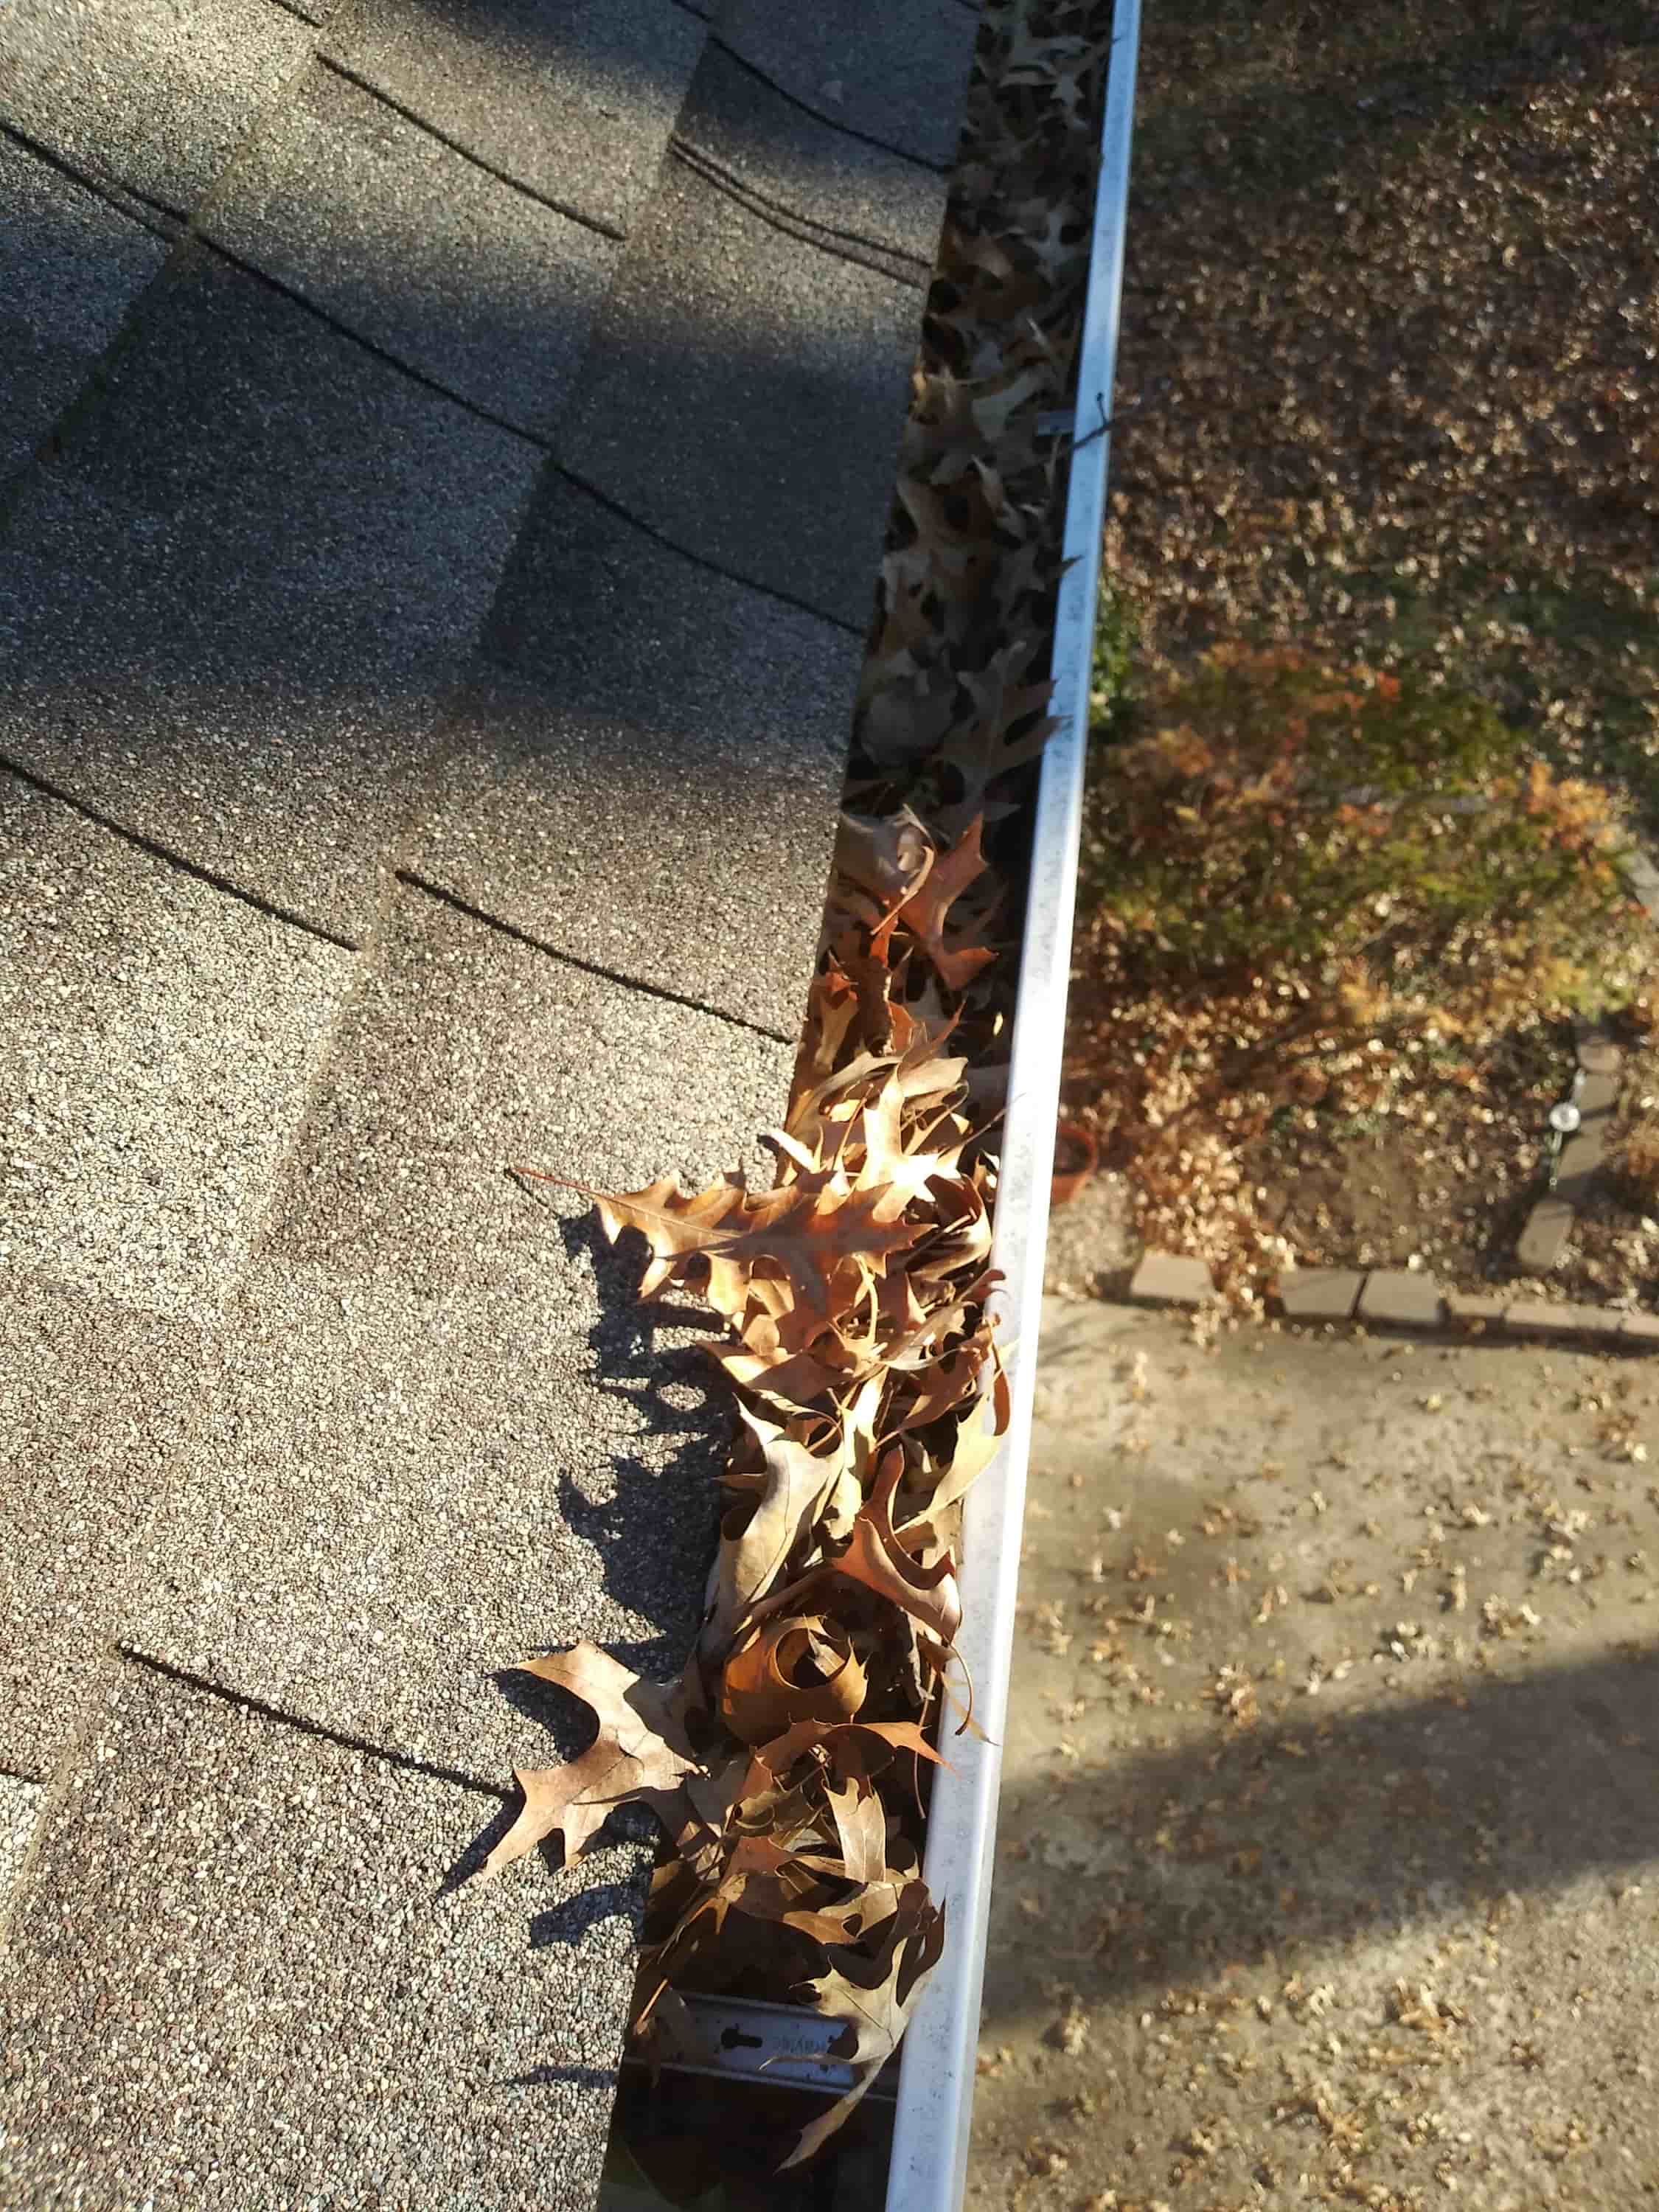 how to remove gutters